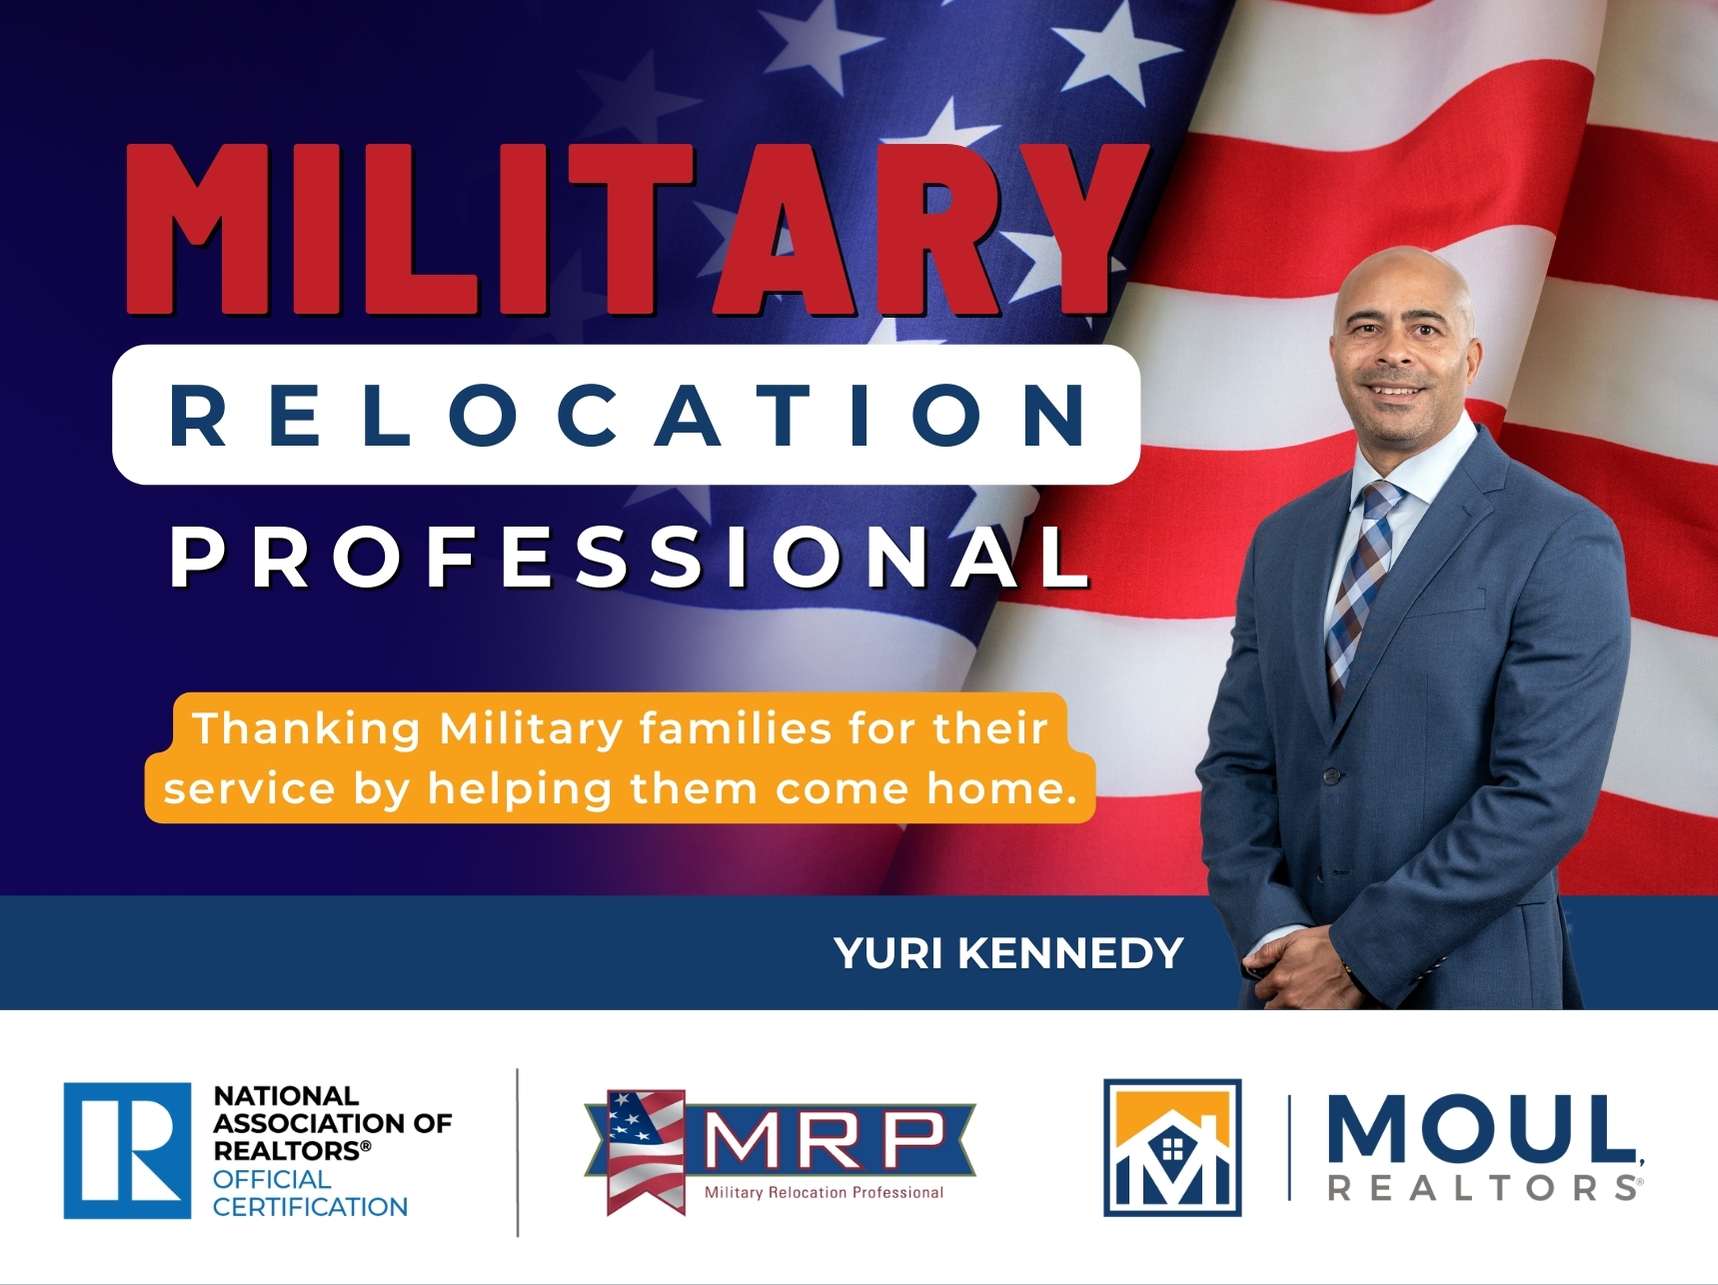 Military Relocation Professional Yuri Kennedy Announcement